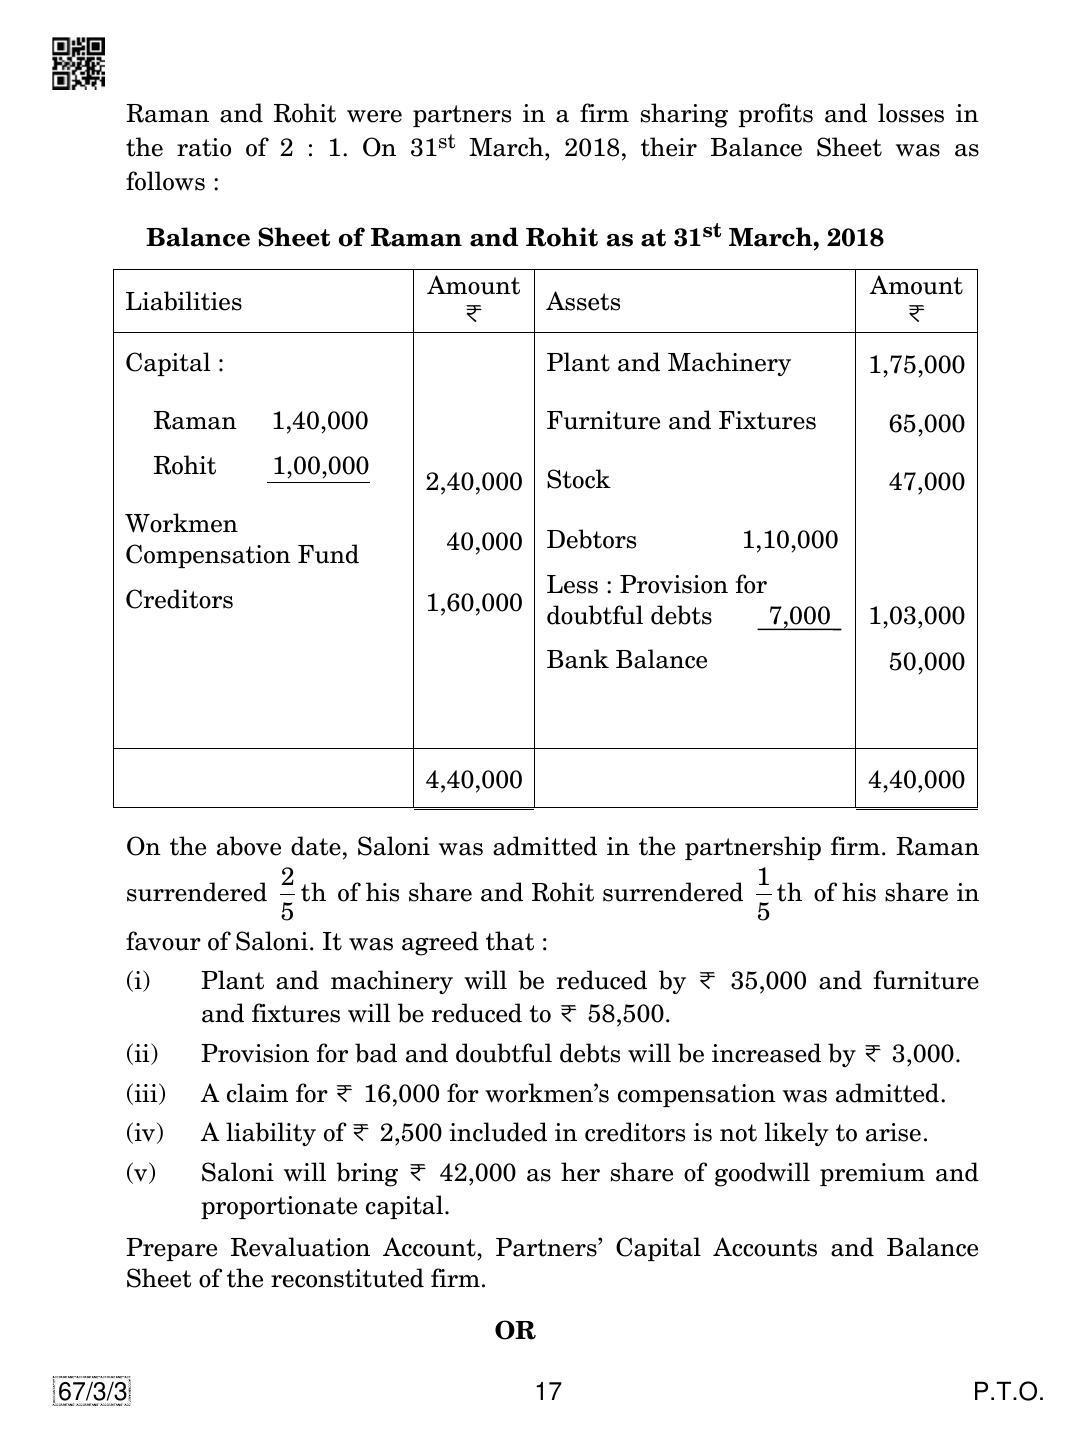 CBSE Class 12 67-3-3 Accountancy 2019 Question Paper - Page 17